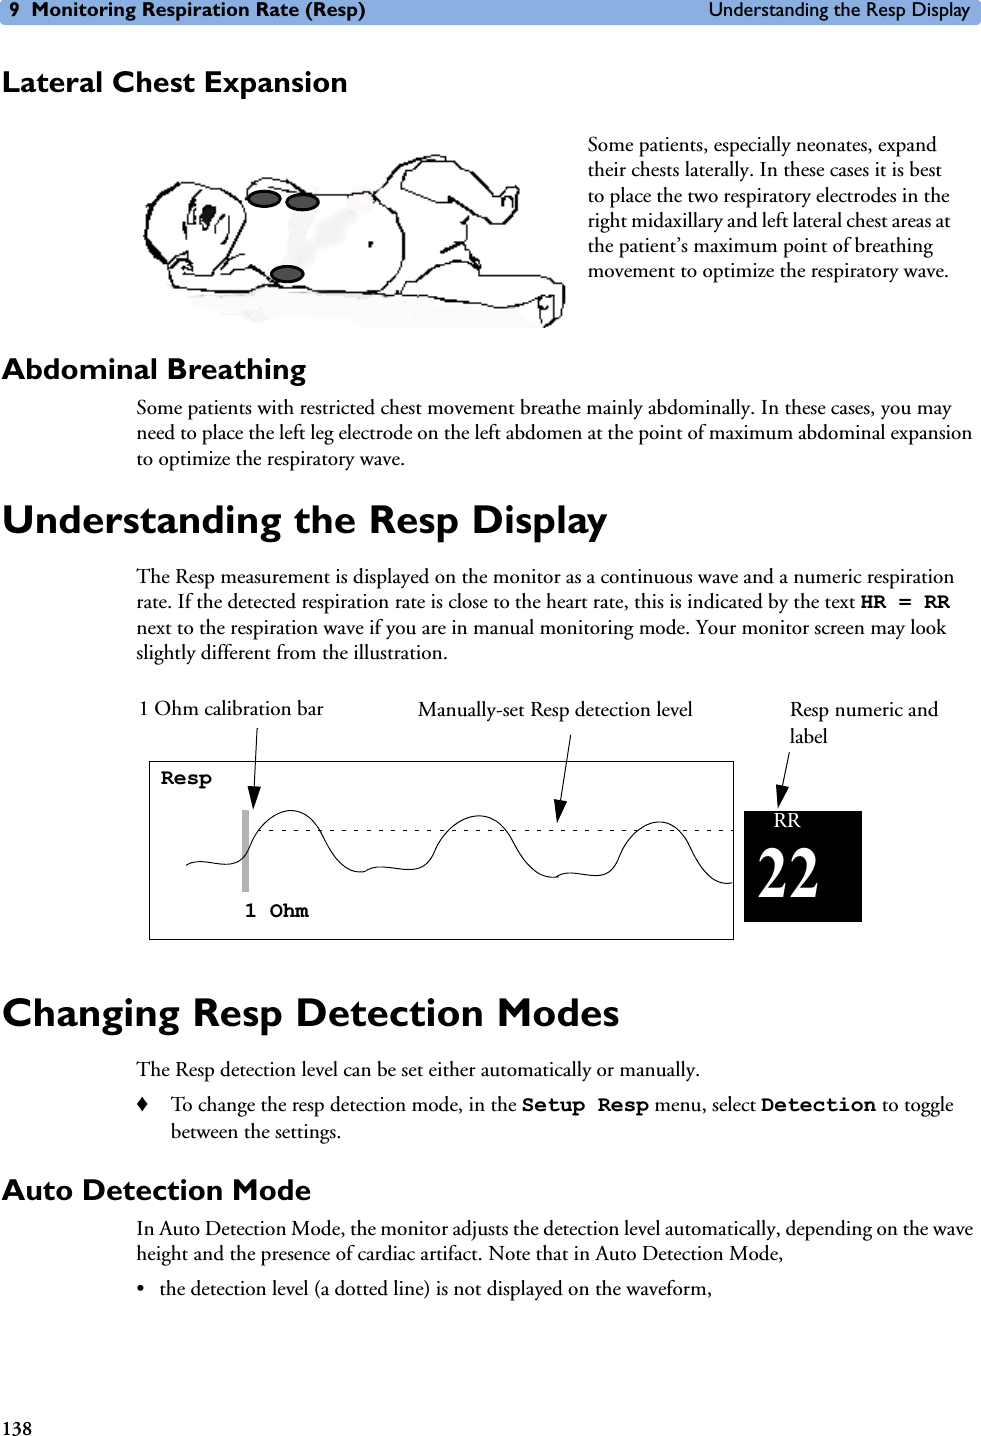 9 Monitoring Respiration Rate (Resp) Understanding the Resp Display138Lateral Chest ExpansionAbdominal BreathingSome patients with restricted chest movement breathe mainly abdominally. In these cases, you may need to place the left leg electrode on the left abdomen at the point of maximum abdominal expansion to optimize the respiratory wave.Understanding the Resp DisplayThe Resp measurement is displayed on the monitor as a continuous wave and a numeric respiration rate. If the detected respiration rate is close to the heart rate, this is indicated by the text HR = RR next to the respiration wave if you are in manual monitoring mode. Your monitor screen may look slightly different from the illustration.Changing Resp Detection ModesThe Resp detection level can be set either automatically or manually. ♦To change the resp detection mode, in the Setup Resp menu, select Detection to toggle between the settings. Auto Detection ModeIn Auto Detection Mode, the monitor adjusts the detection level automatically, depending on the wave height and the presence of cardiac artifact. Note that in Auto Detection Mode, • the detection level (a dotted line) is not displayed on the waveform,Some patients, especially neonates, expand their chests laterally. In these cases it is best to place the two respiratory electrodes in the right midaxillary and left lateral chest areas at the patient’s maximum point of breathing movement to optimize the respiratory wave. Resp1 Ohm22RRManually-set Resp detection level1 Ohm calibration bar Resp numeric and label